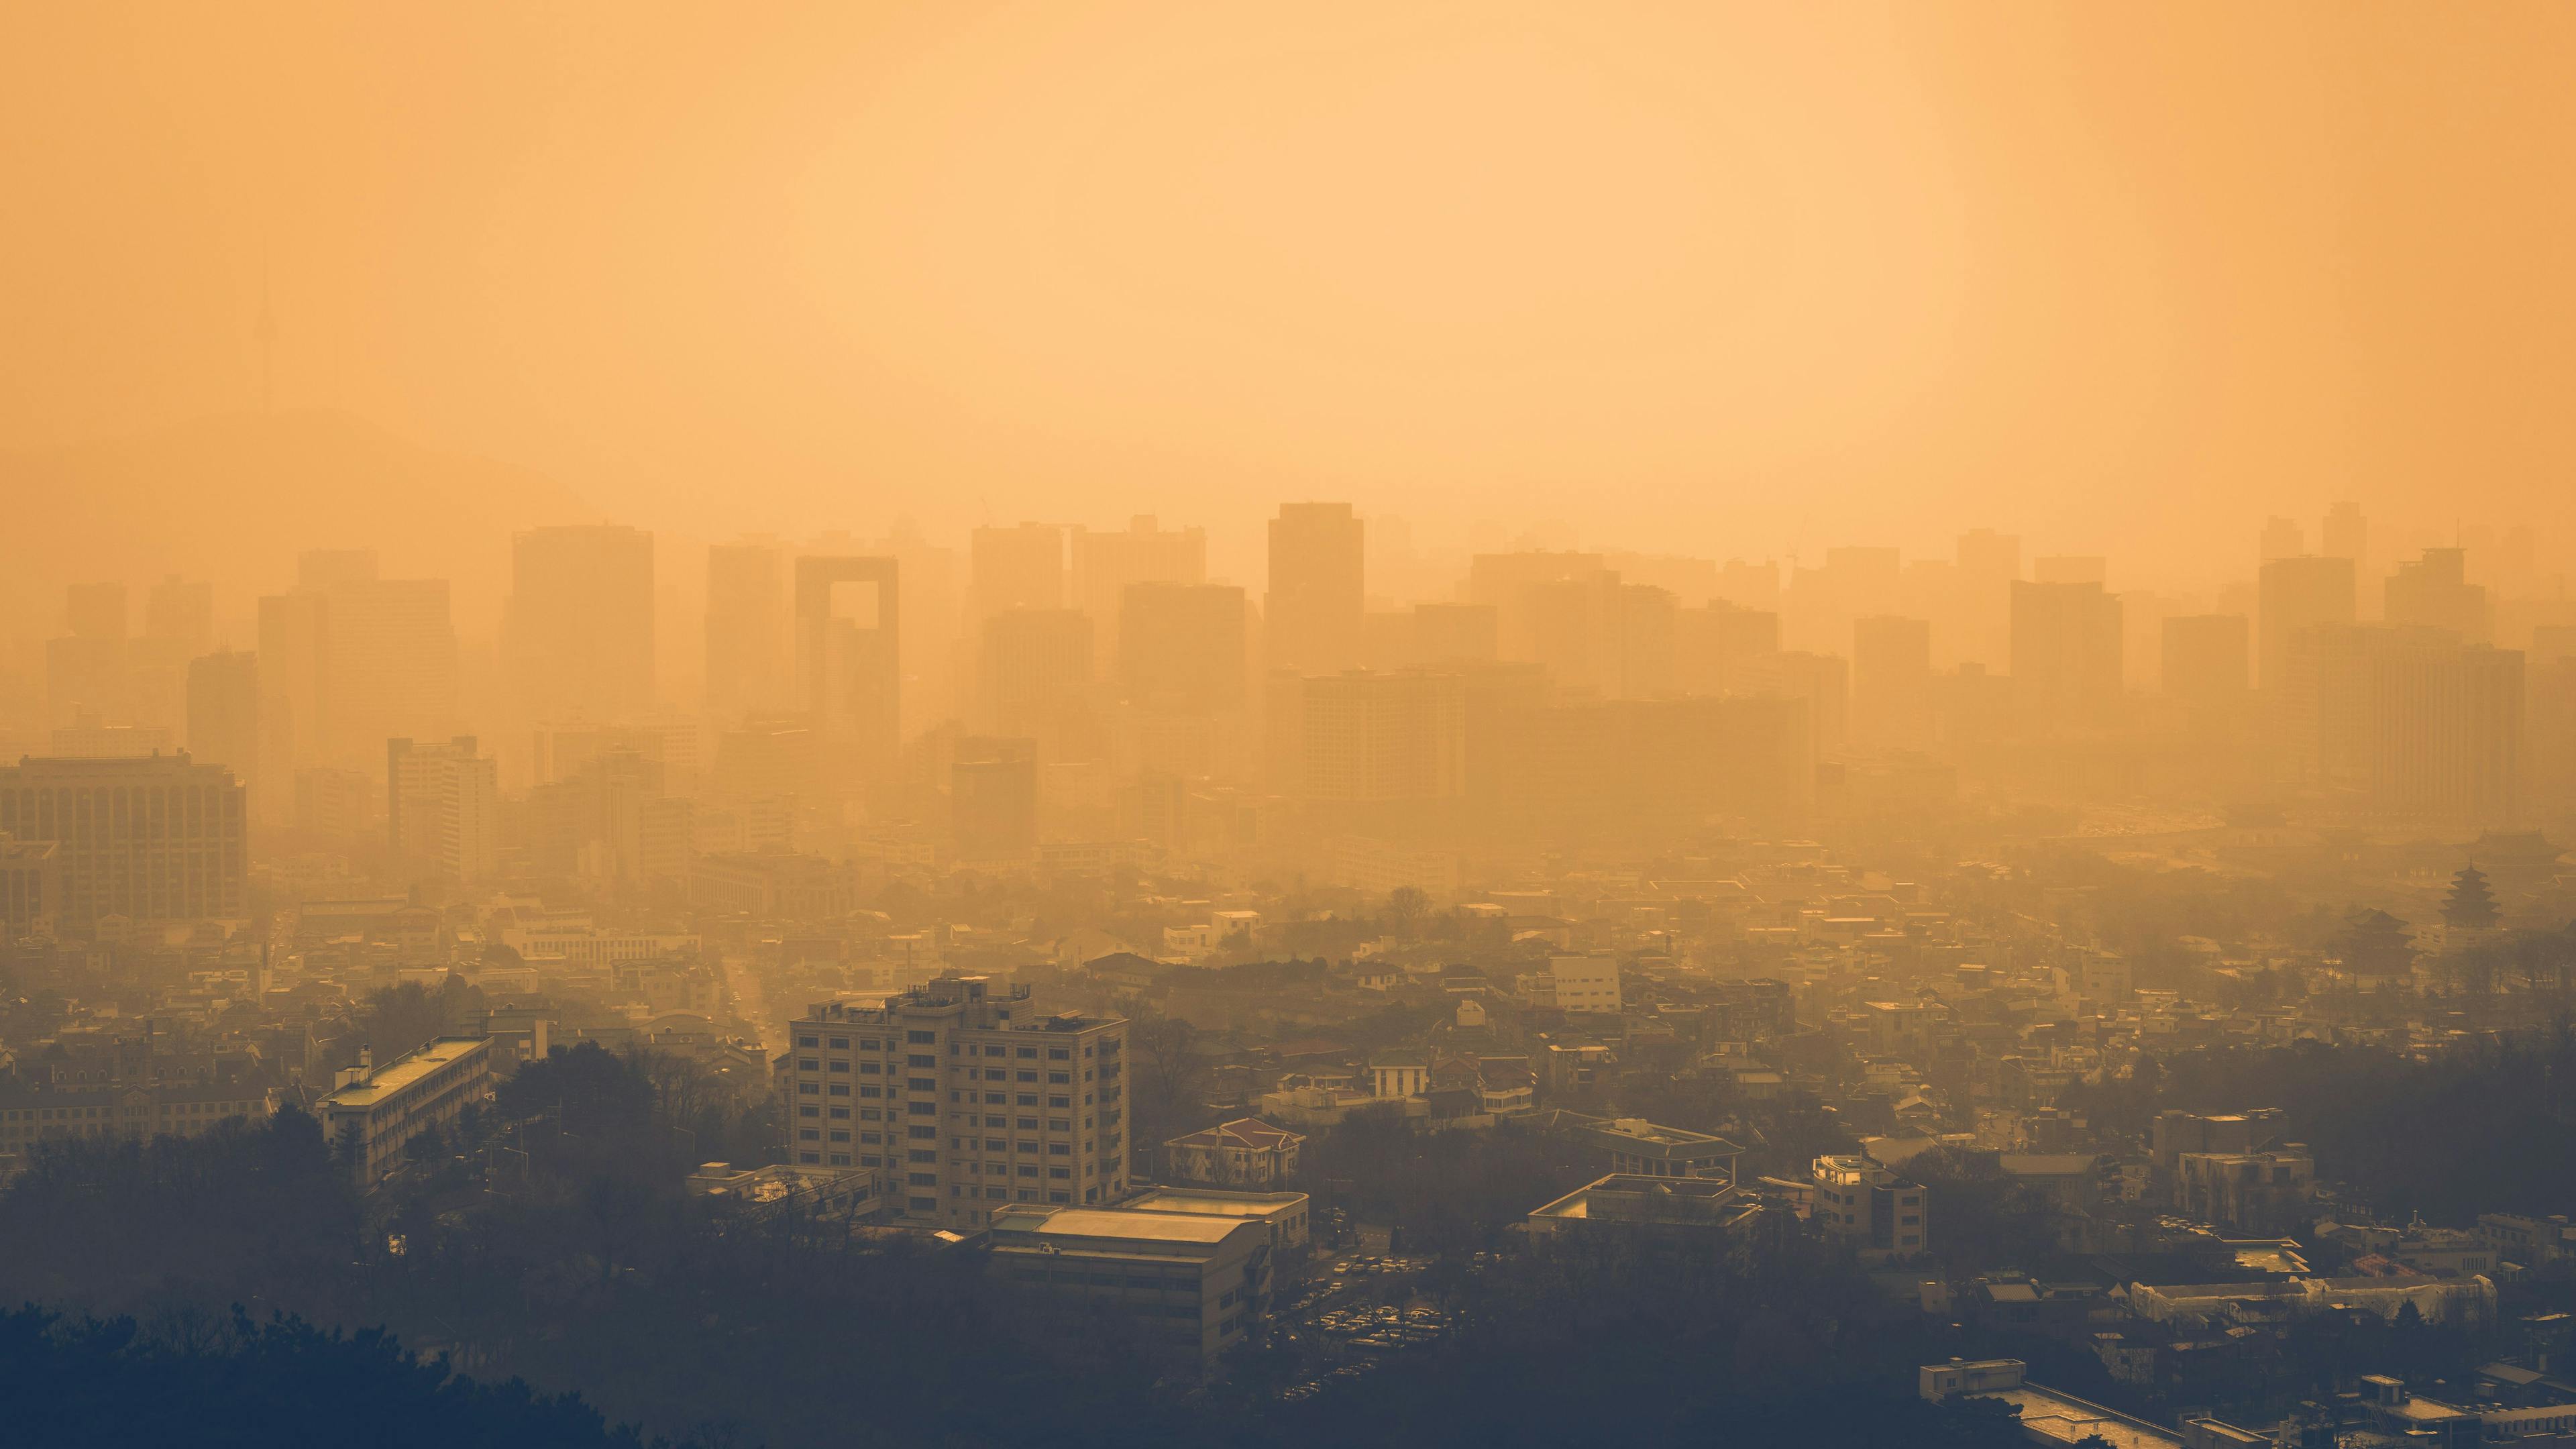 Severe air pollution covering a city | Image credit: ttlsc - stock.adobe.com